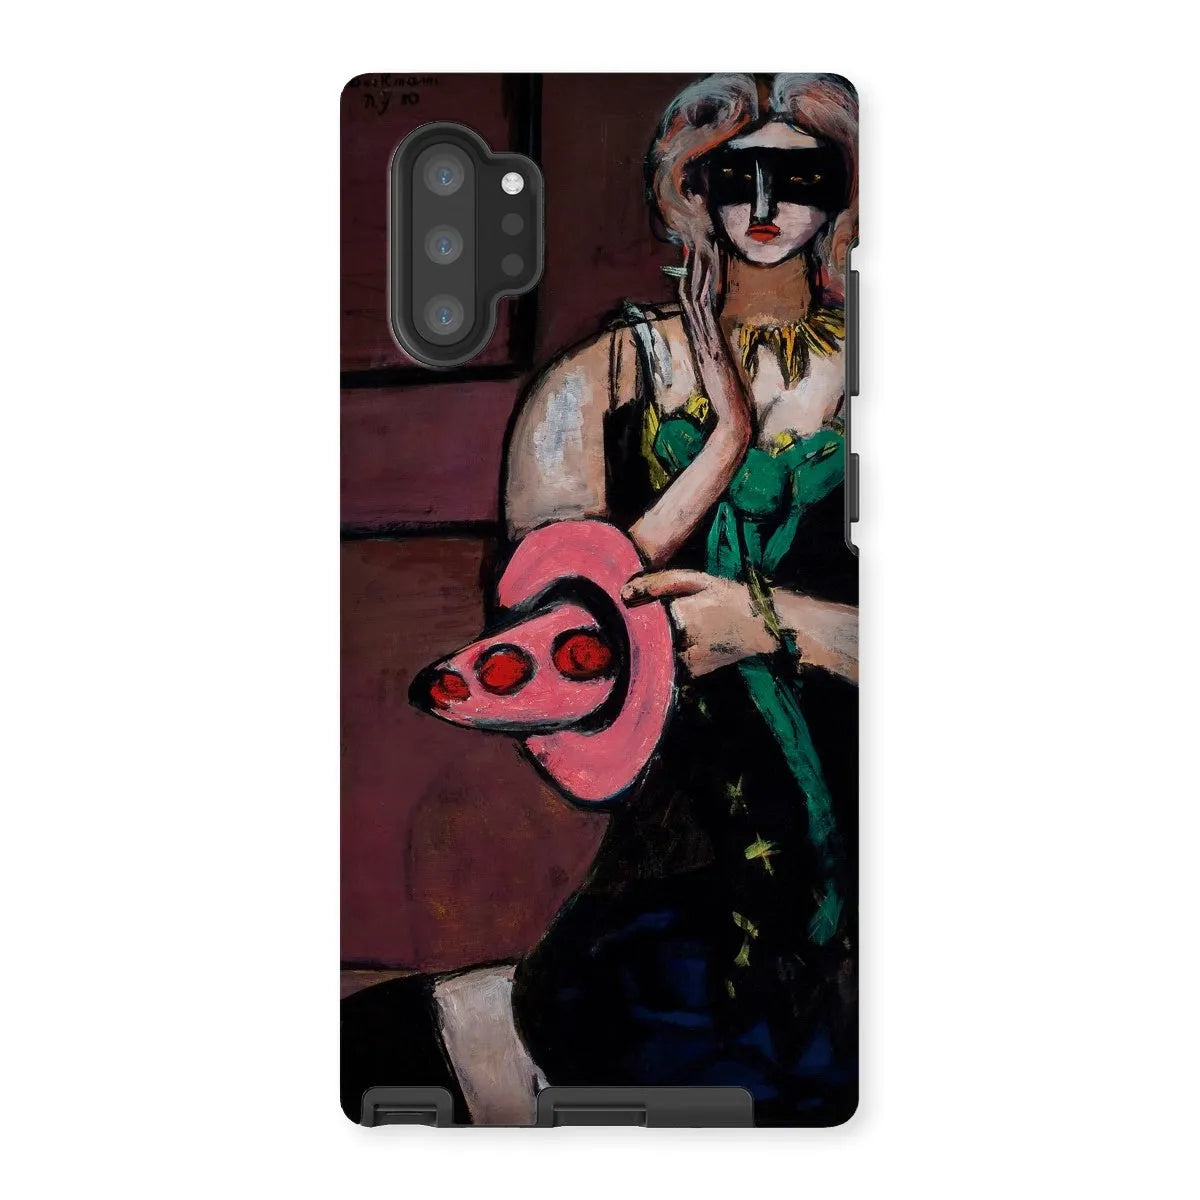 Carnival Mask - German Art Phone Case - Max Beckmann - Samsung Galaxy Note 10p / Matte - Mobile Phone Cases - Aesthetic